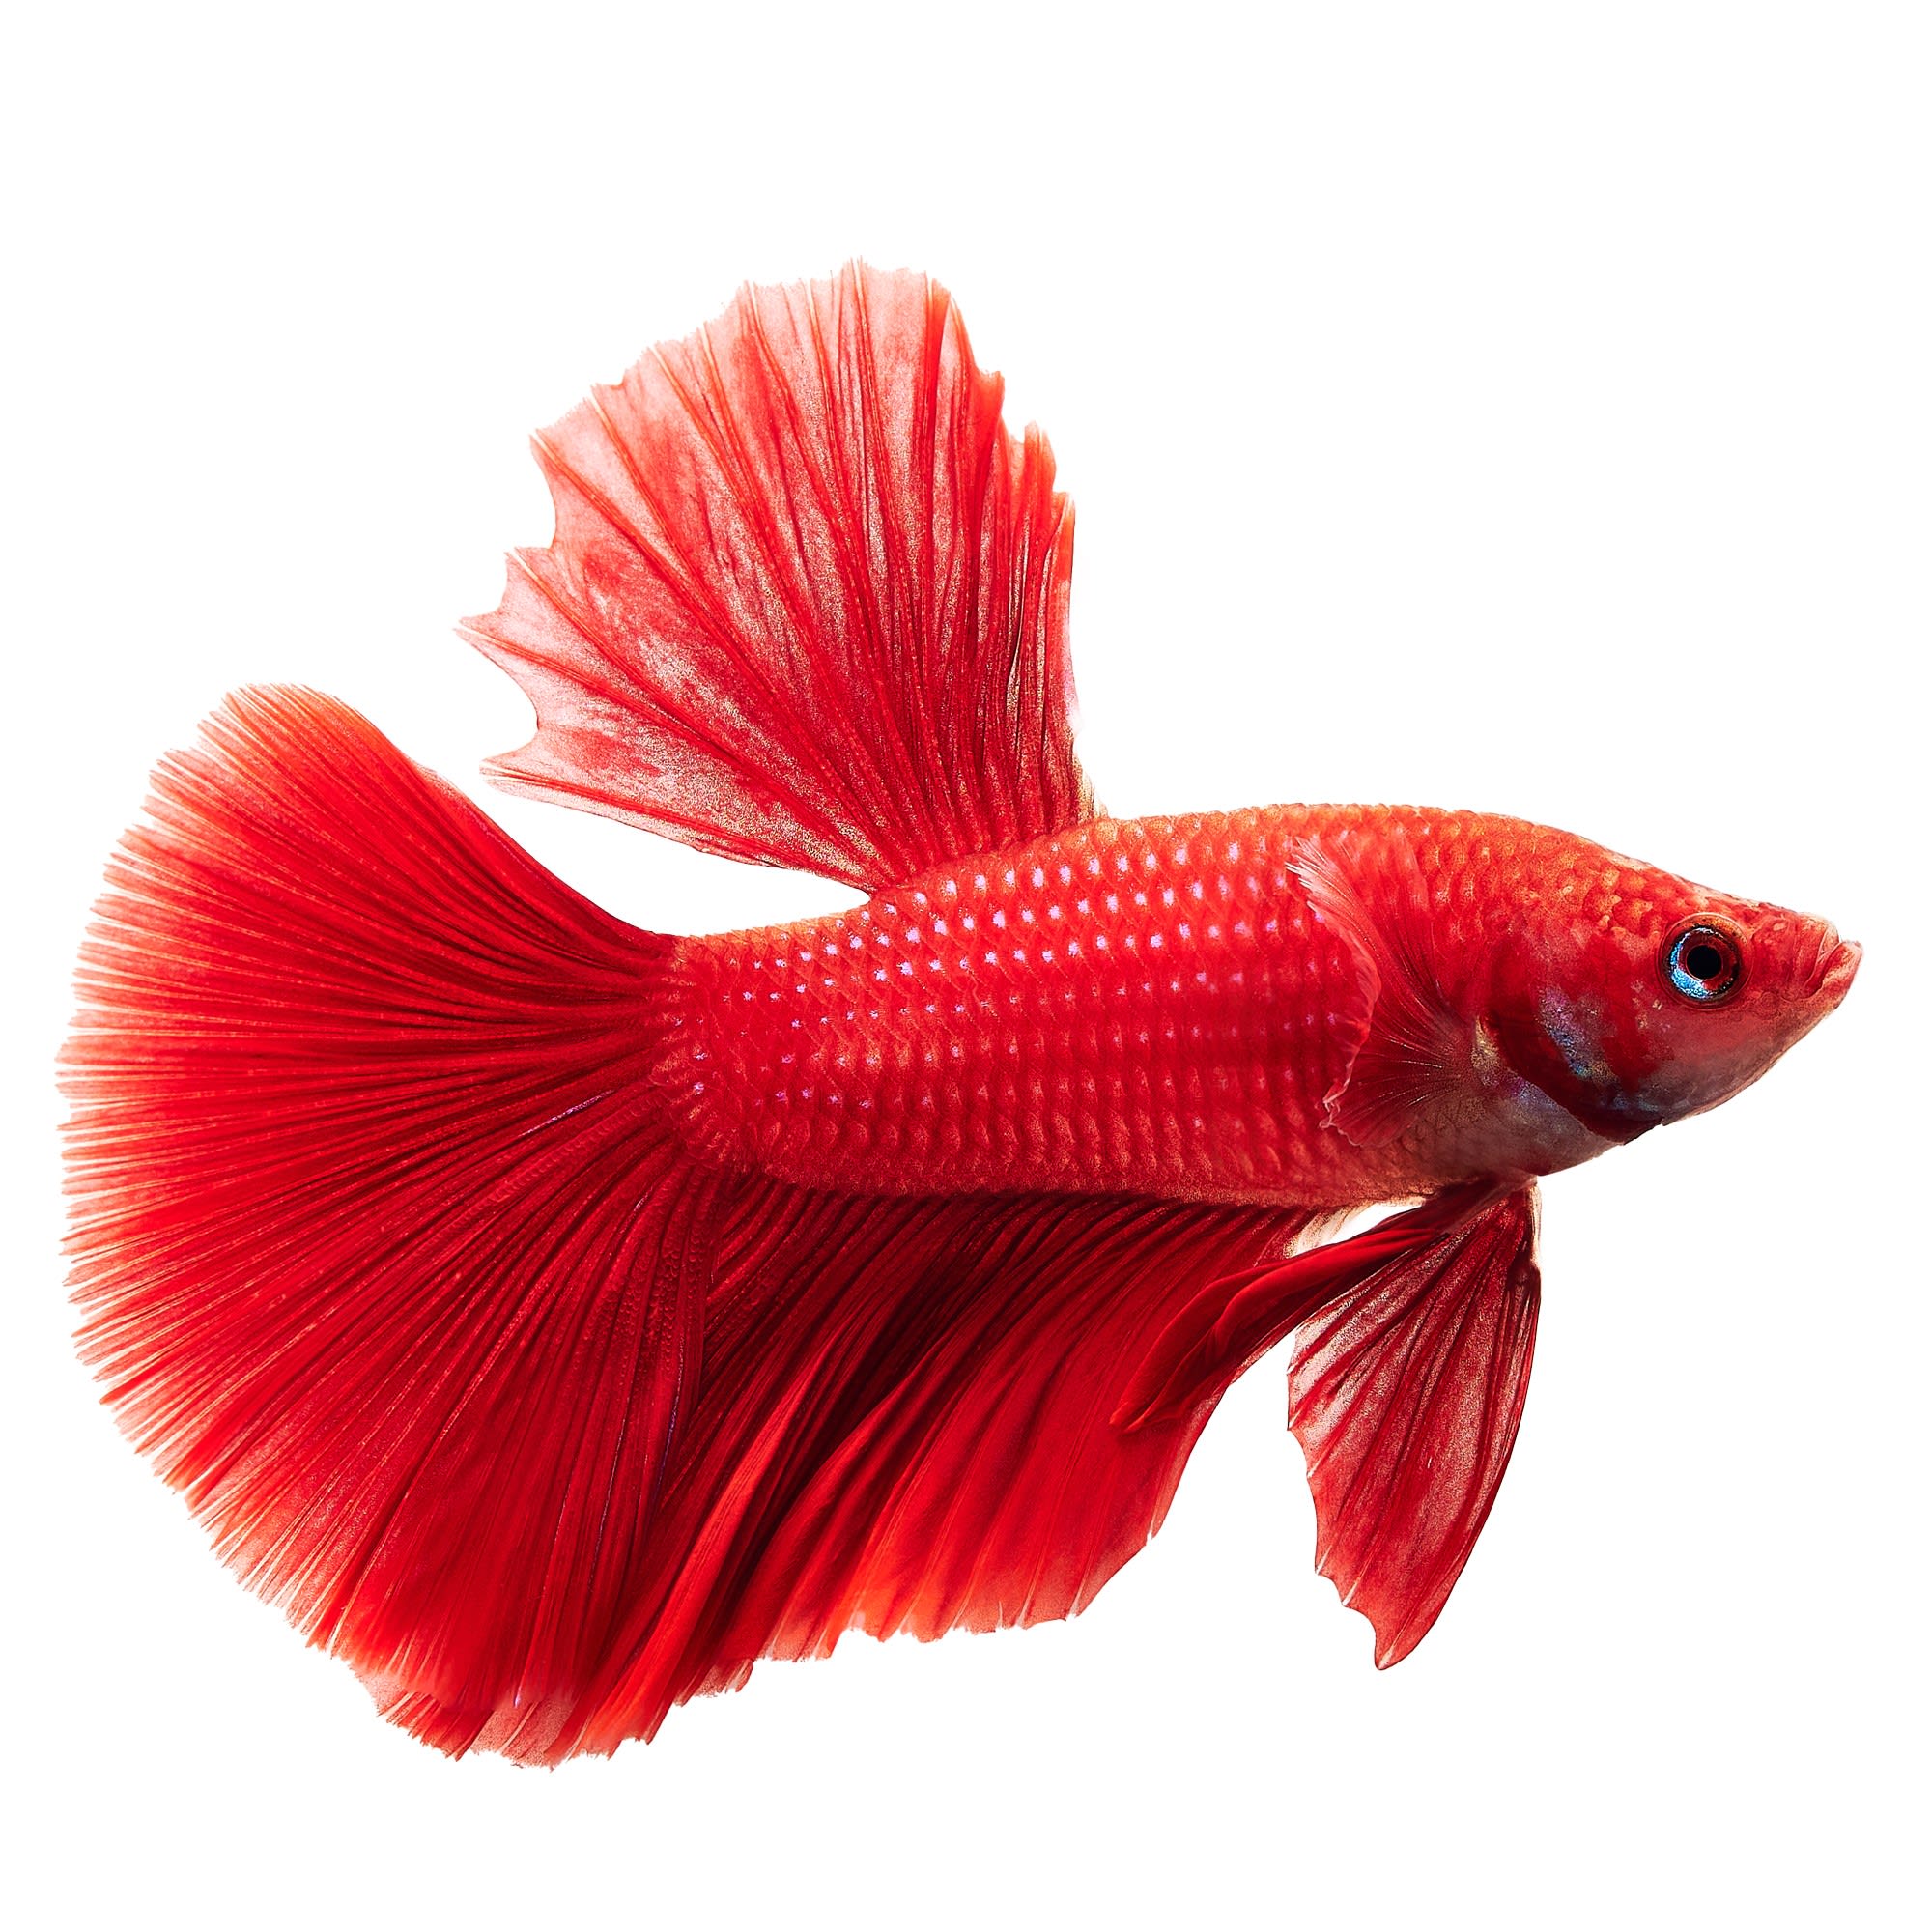 male-deltatail-bettas-for-sale-order-online-petco